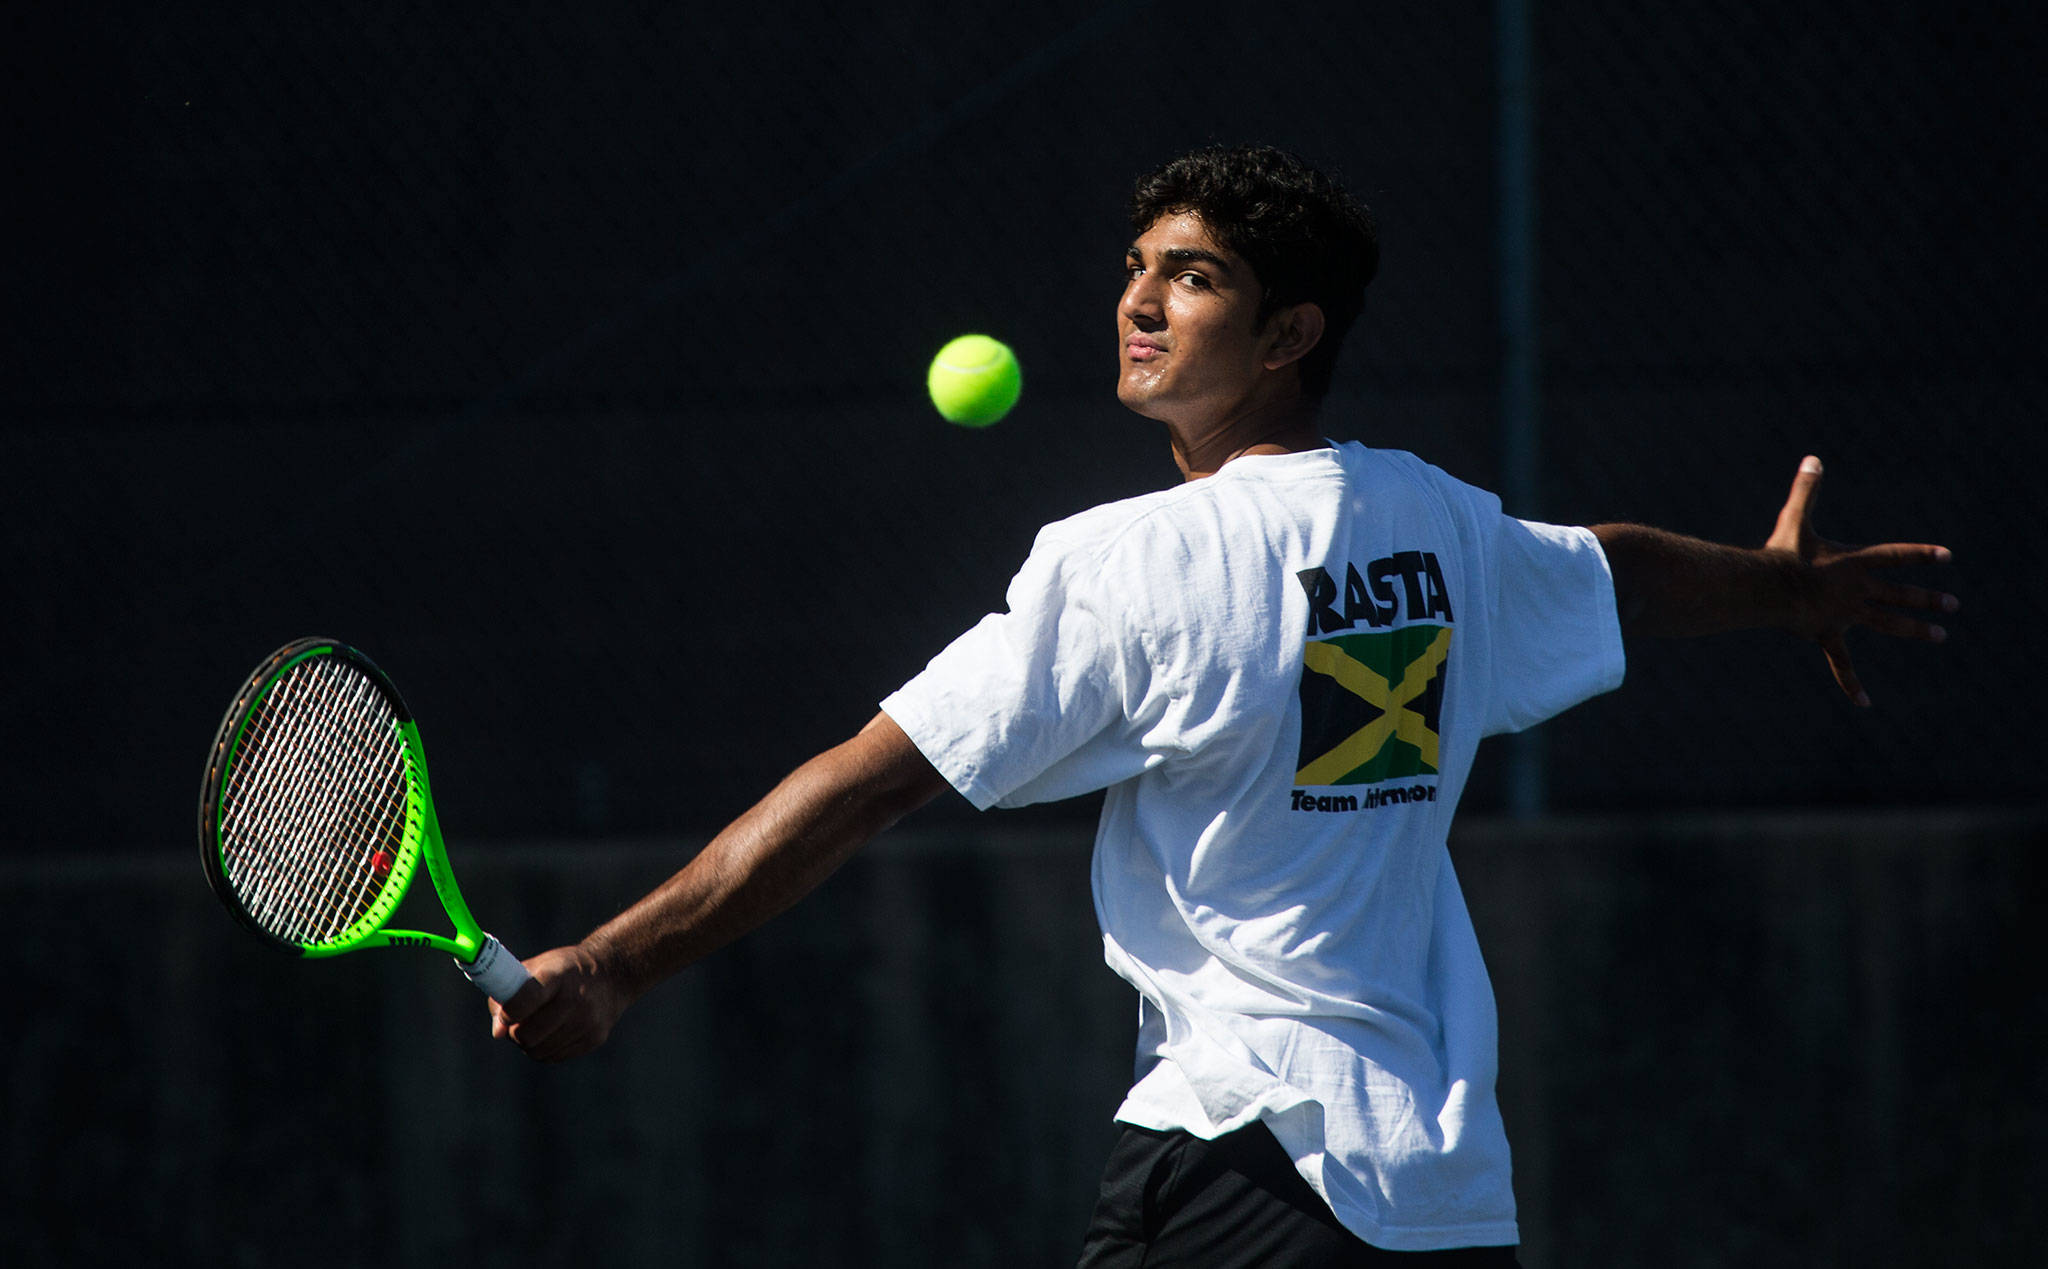 Jackson senior Anuj Vimawala watches the ball on a backhand shot during practice on Aug. 27 in Everett. Vimawala is one of the top returning tennis players in the area this season. (Andy Bronson / The Herald)